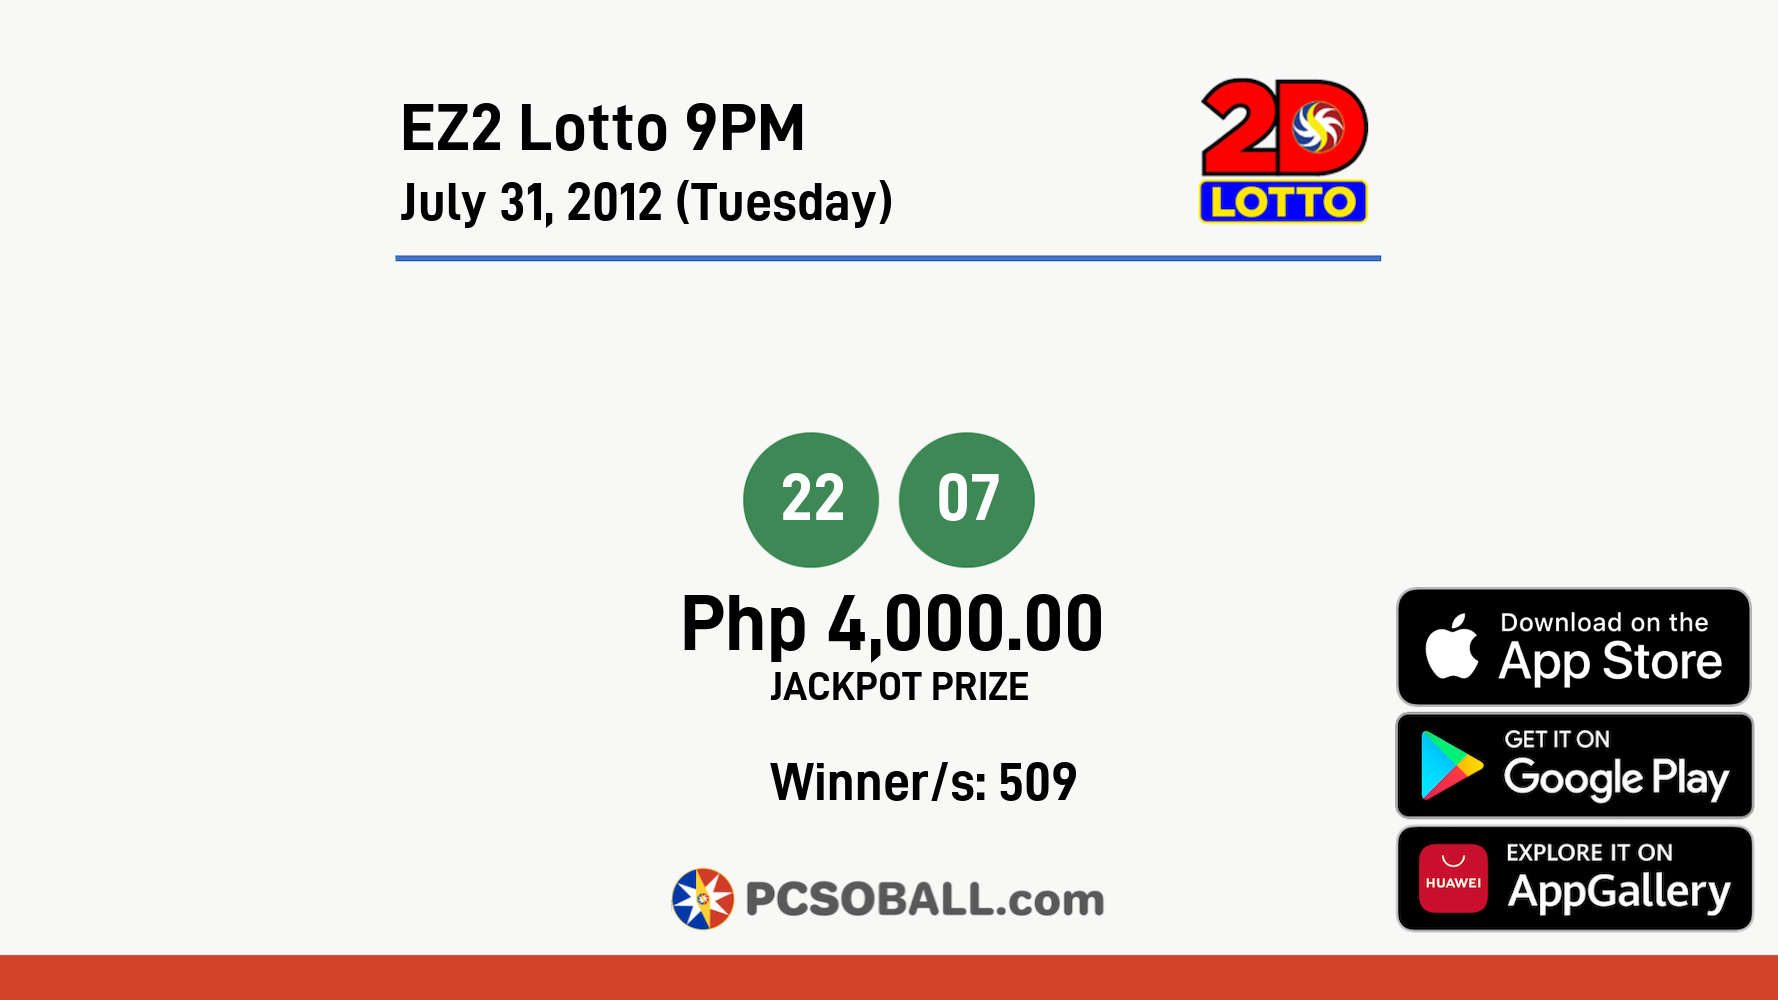 EZ2 Lotto 9PM July 31, 2012 (Tuesday) Result